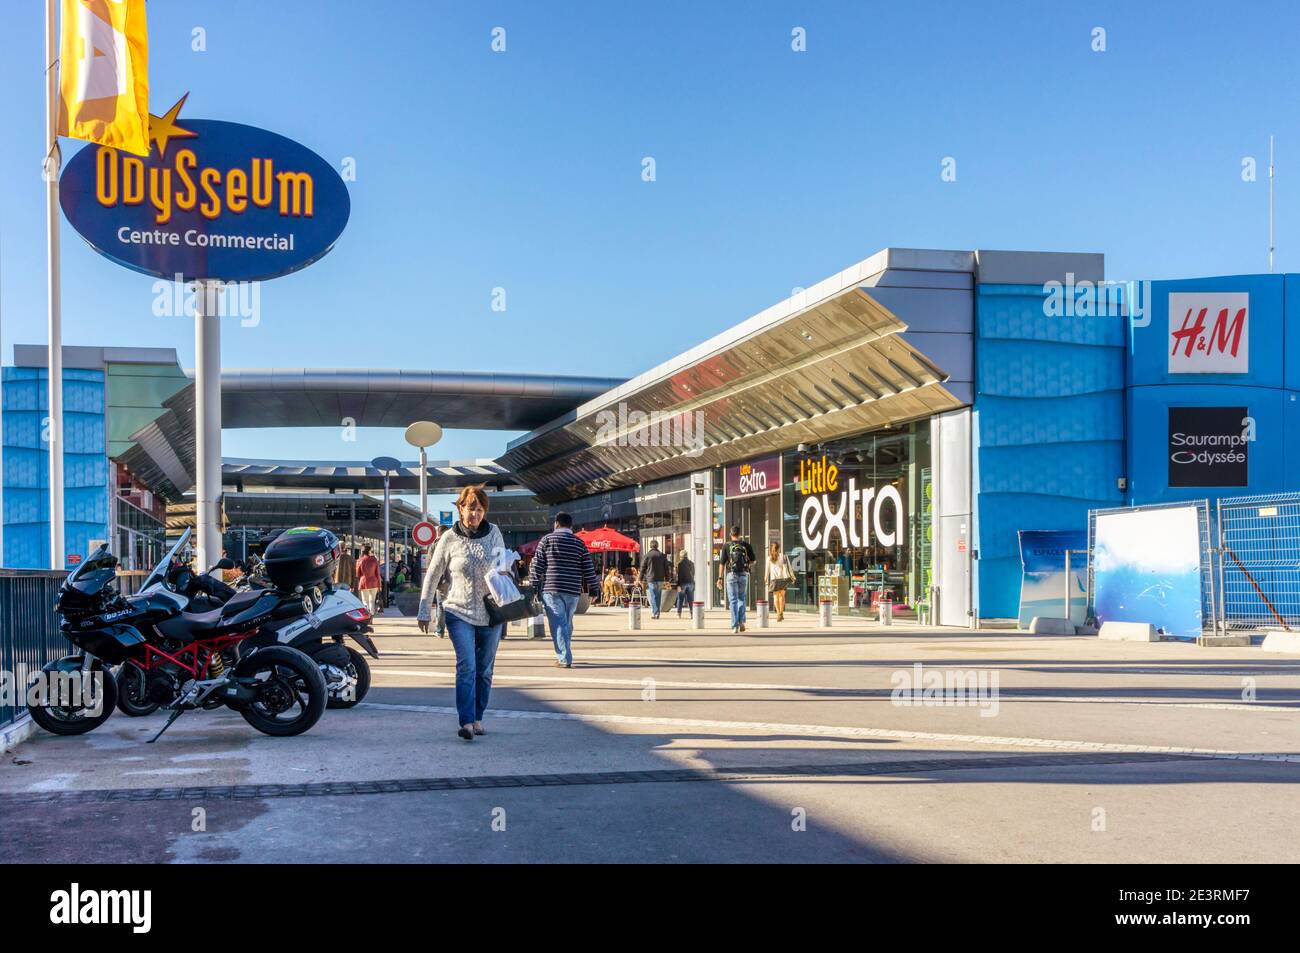 Odysseum shopping centre in Montpellier, southern France Stock Photo - Alamy